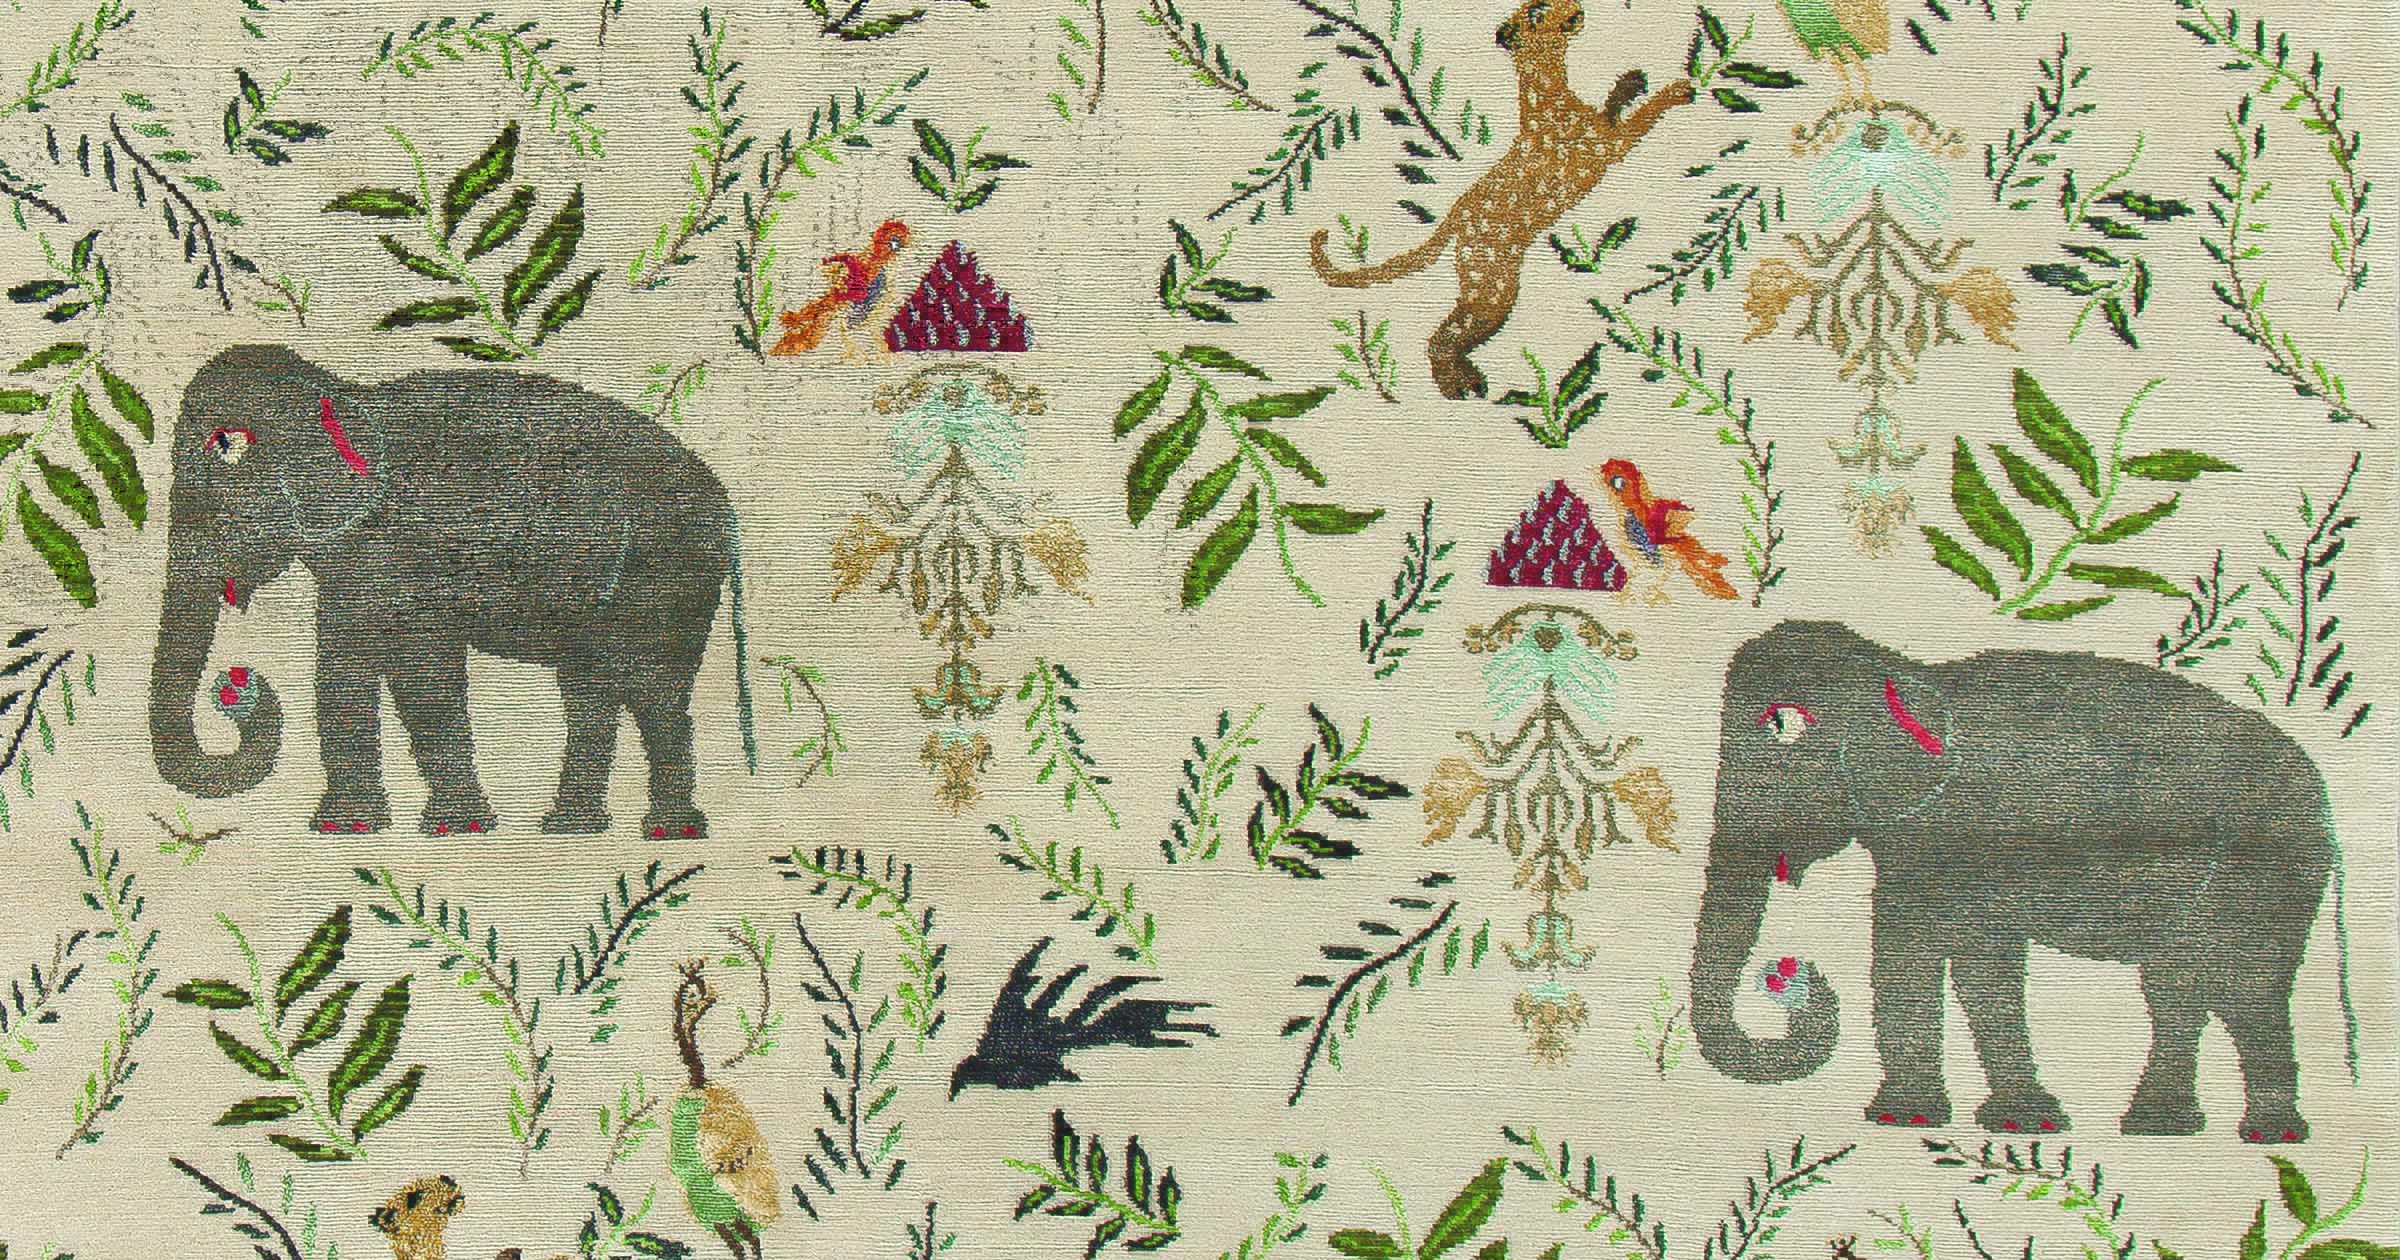 Menagerie New Moon The Ruggist, New Moon Rugs